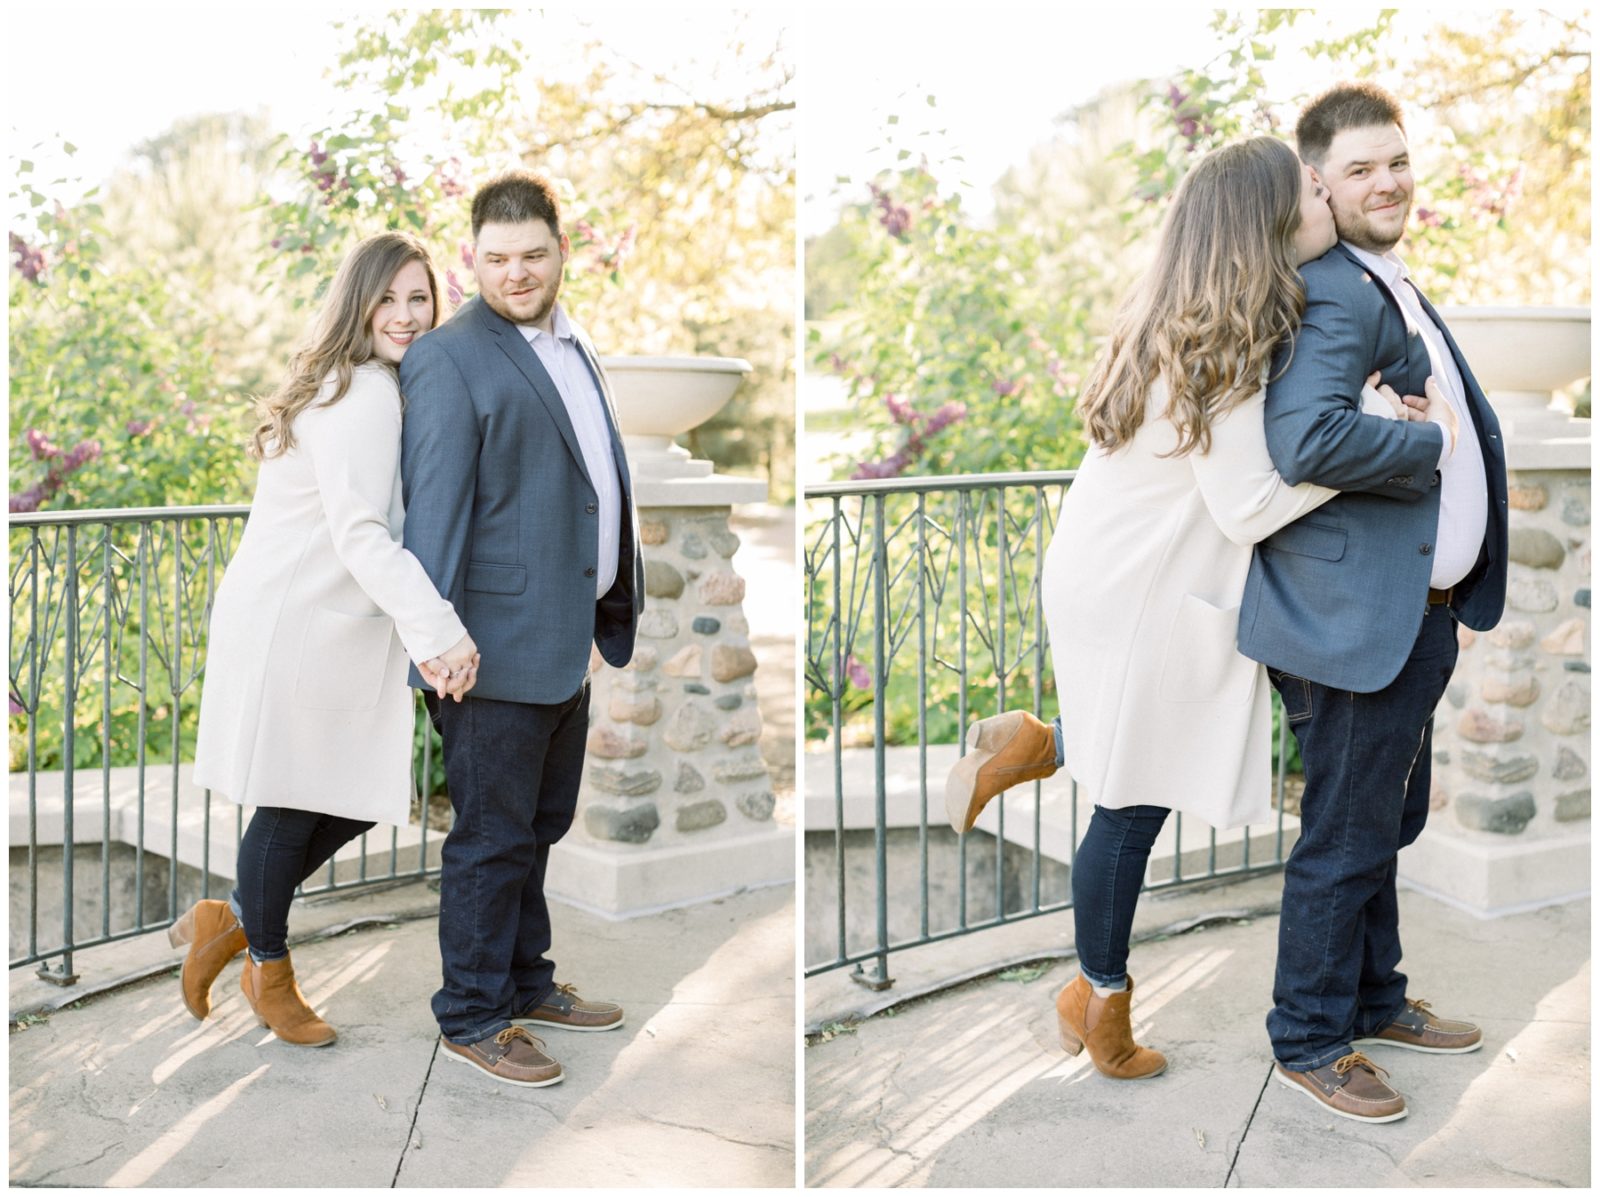 Engagement session in Mpls with happy couple